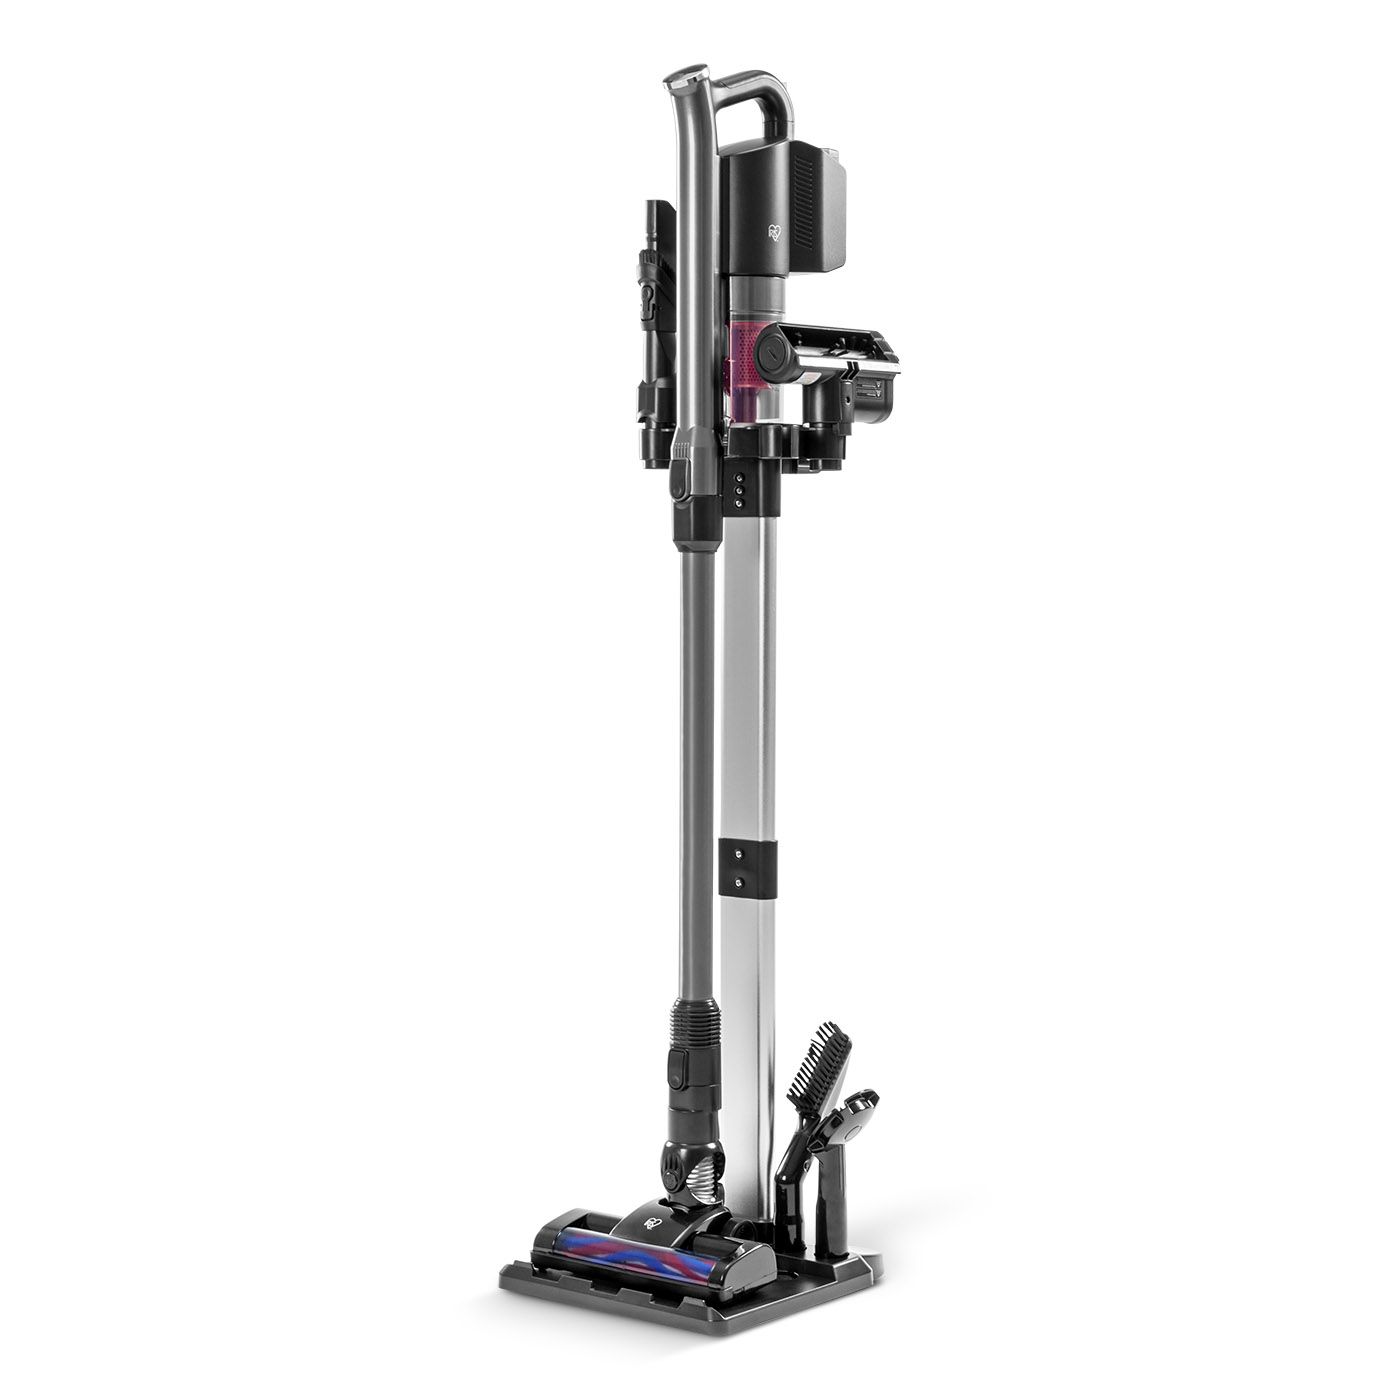 IRIS USA’s Cordless Cyclone Vacuum Cleaner for Mother's Day